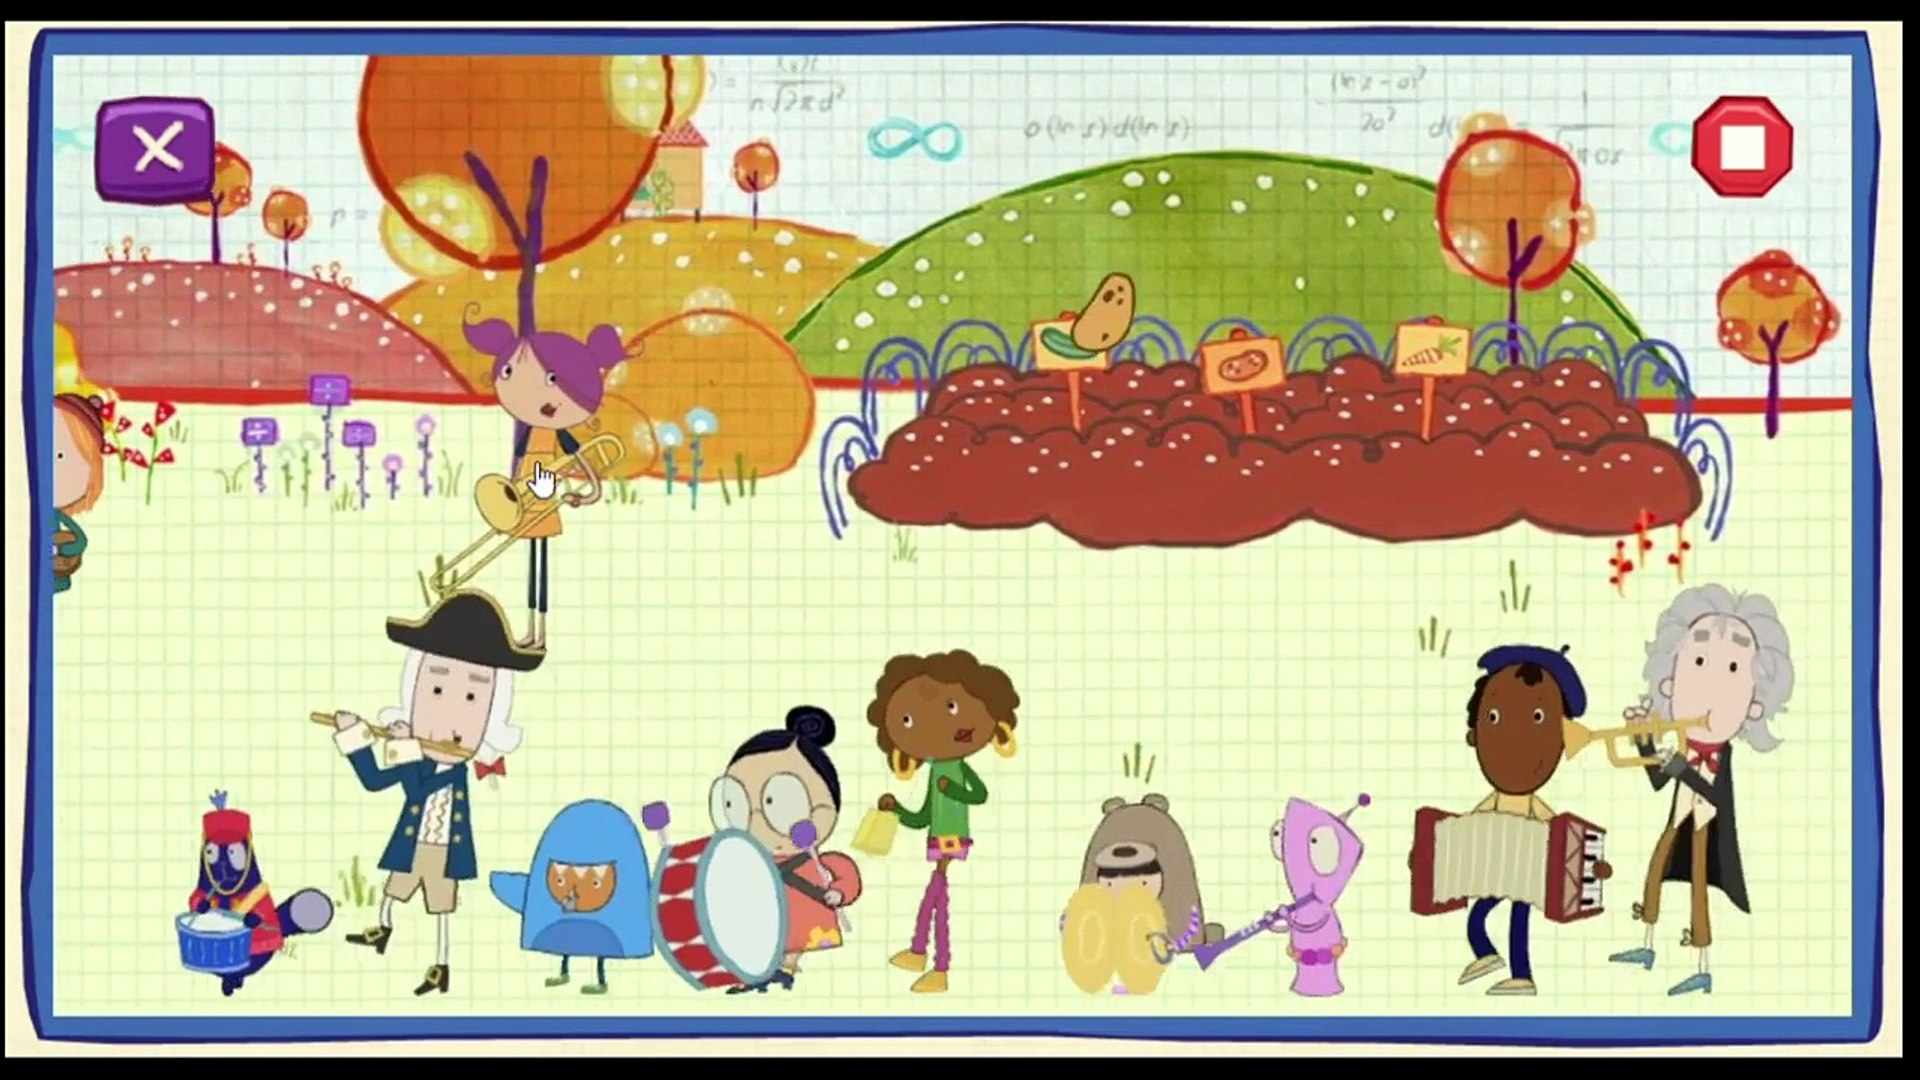 Numbers 1 to 10 Kids Games - 123 Learning for kids. Peg + Cat Parade. Education for babies